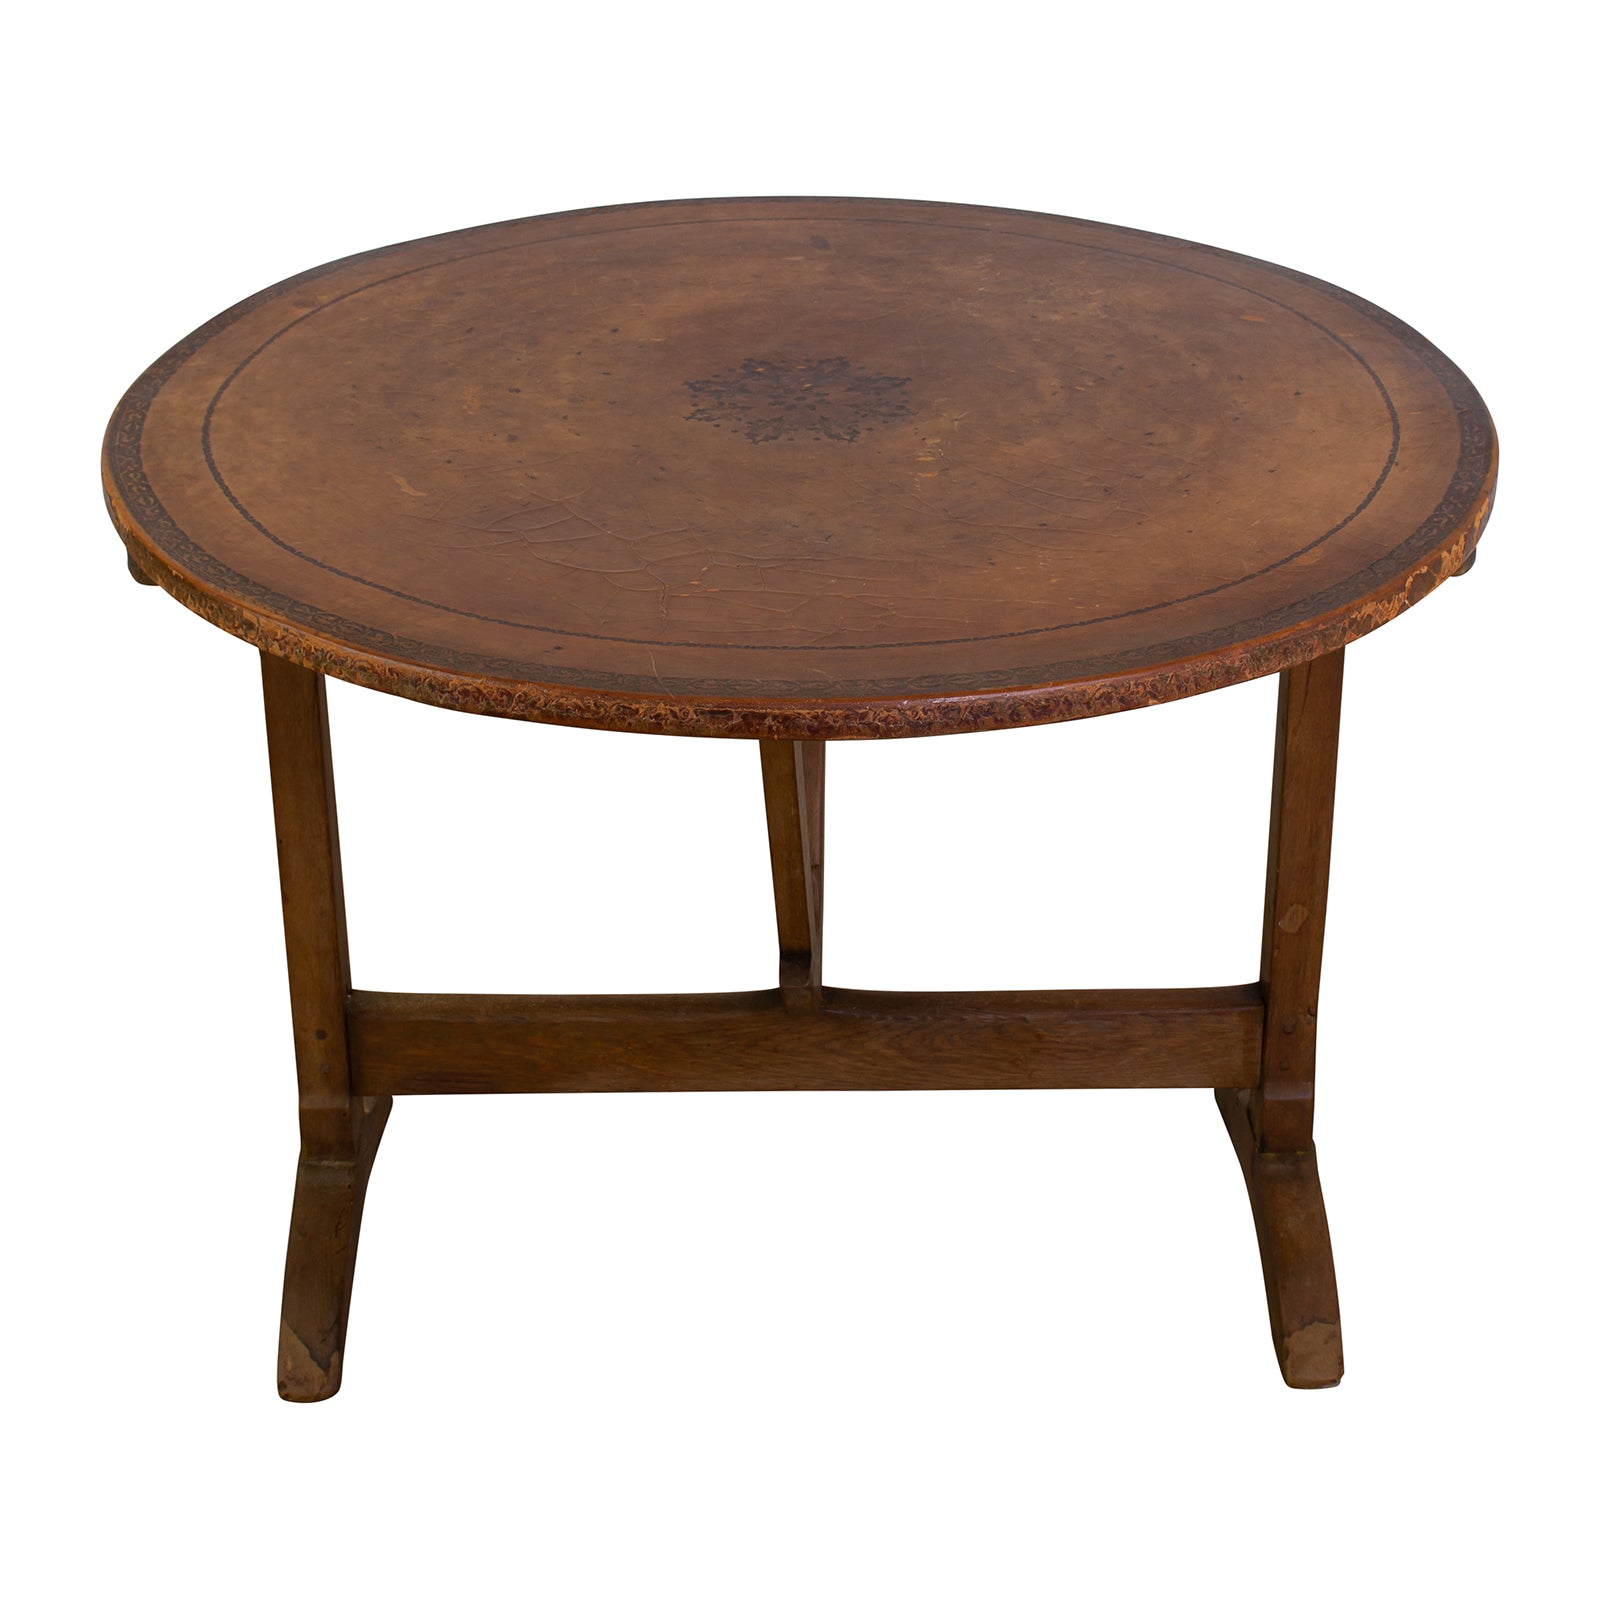 19th Century Vigneron Table with Tooled  Leather Top